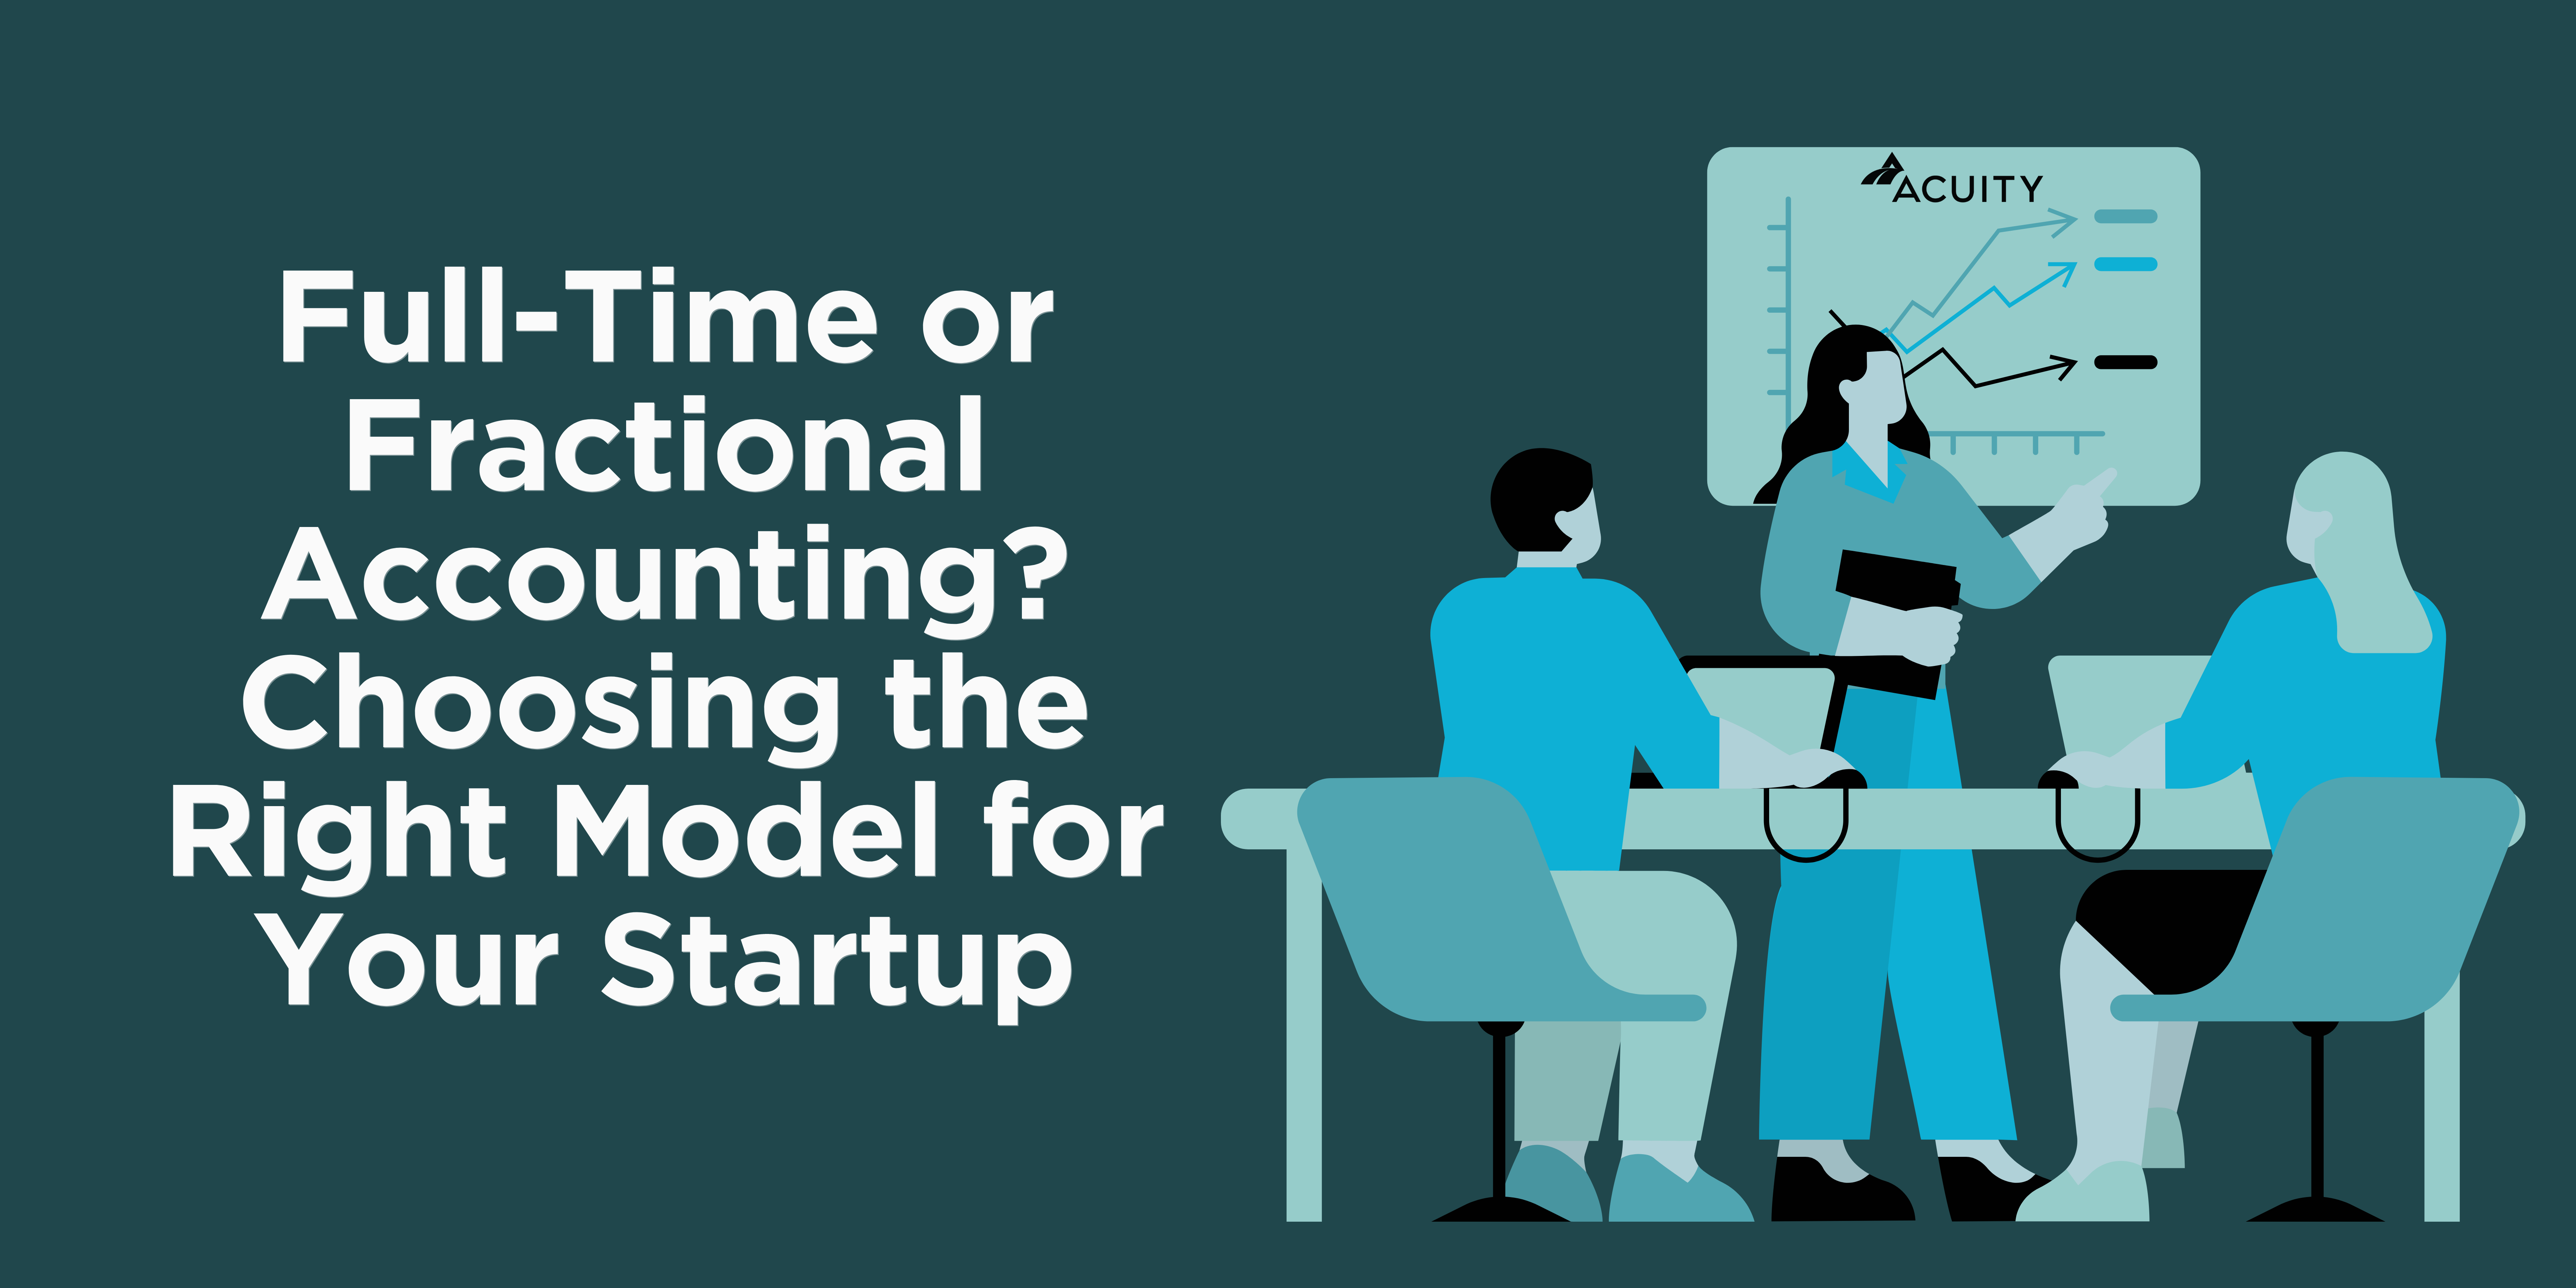 Full-Time or Fractional Accounting Services? Choosing the Right Model for Your Startup | Acuity